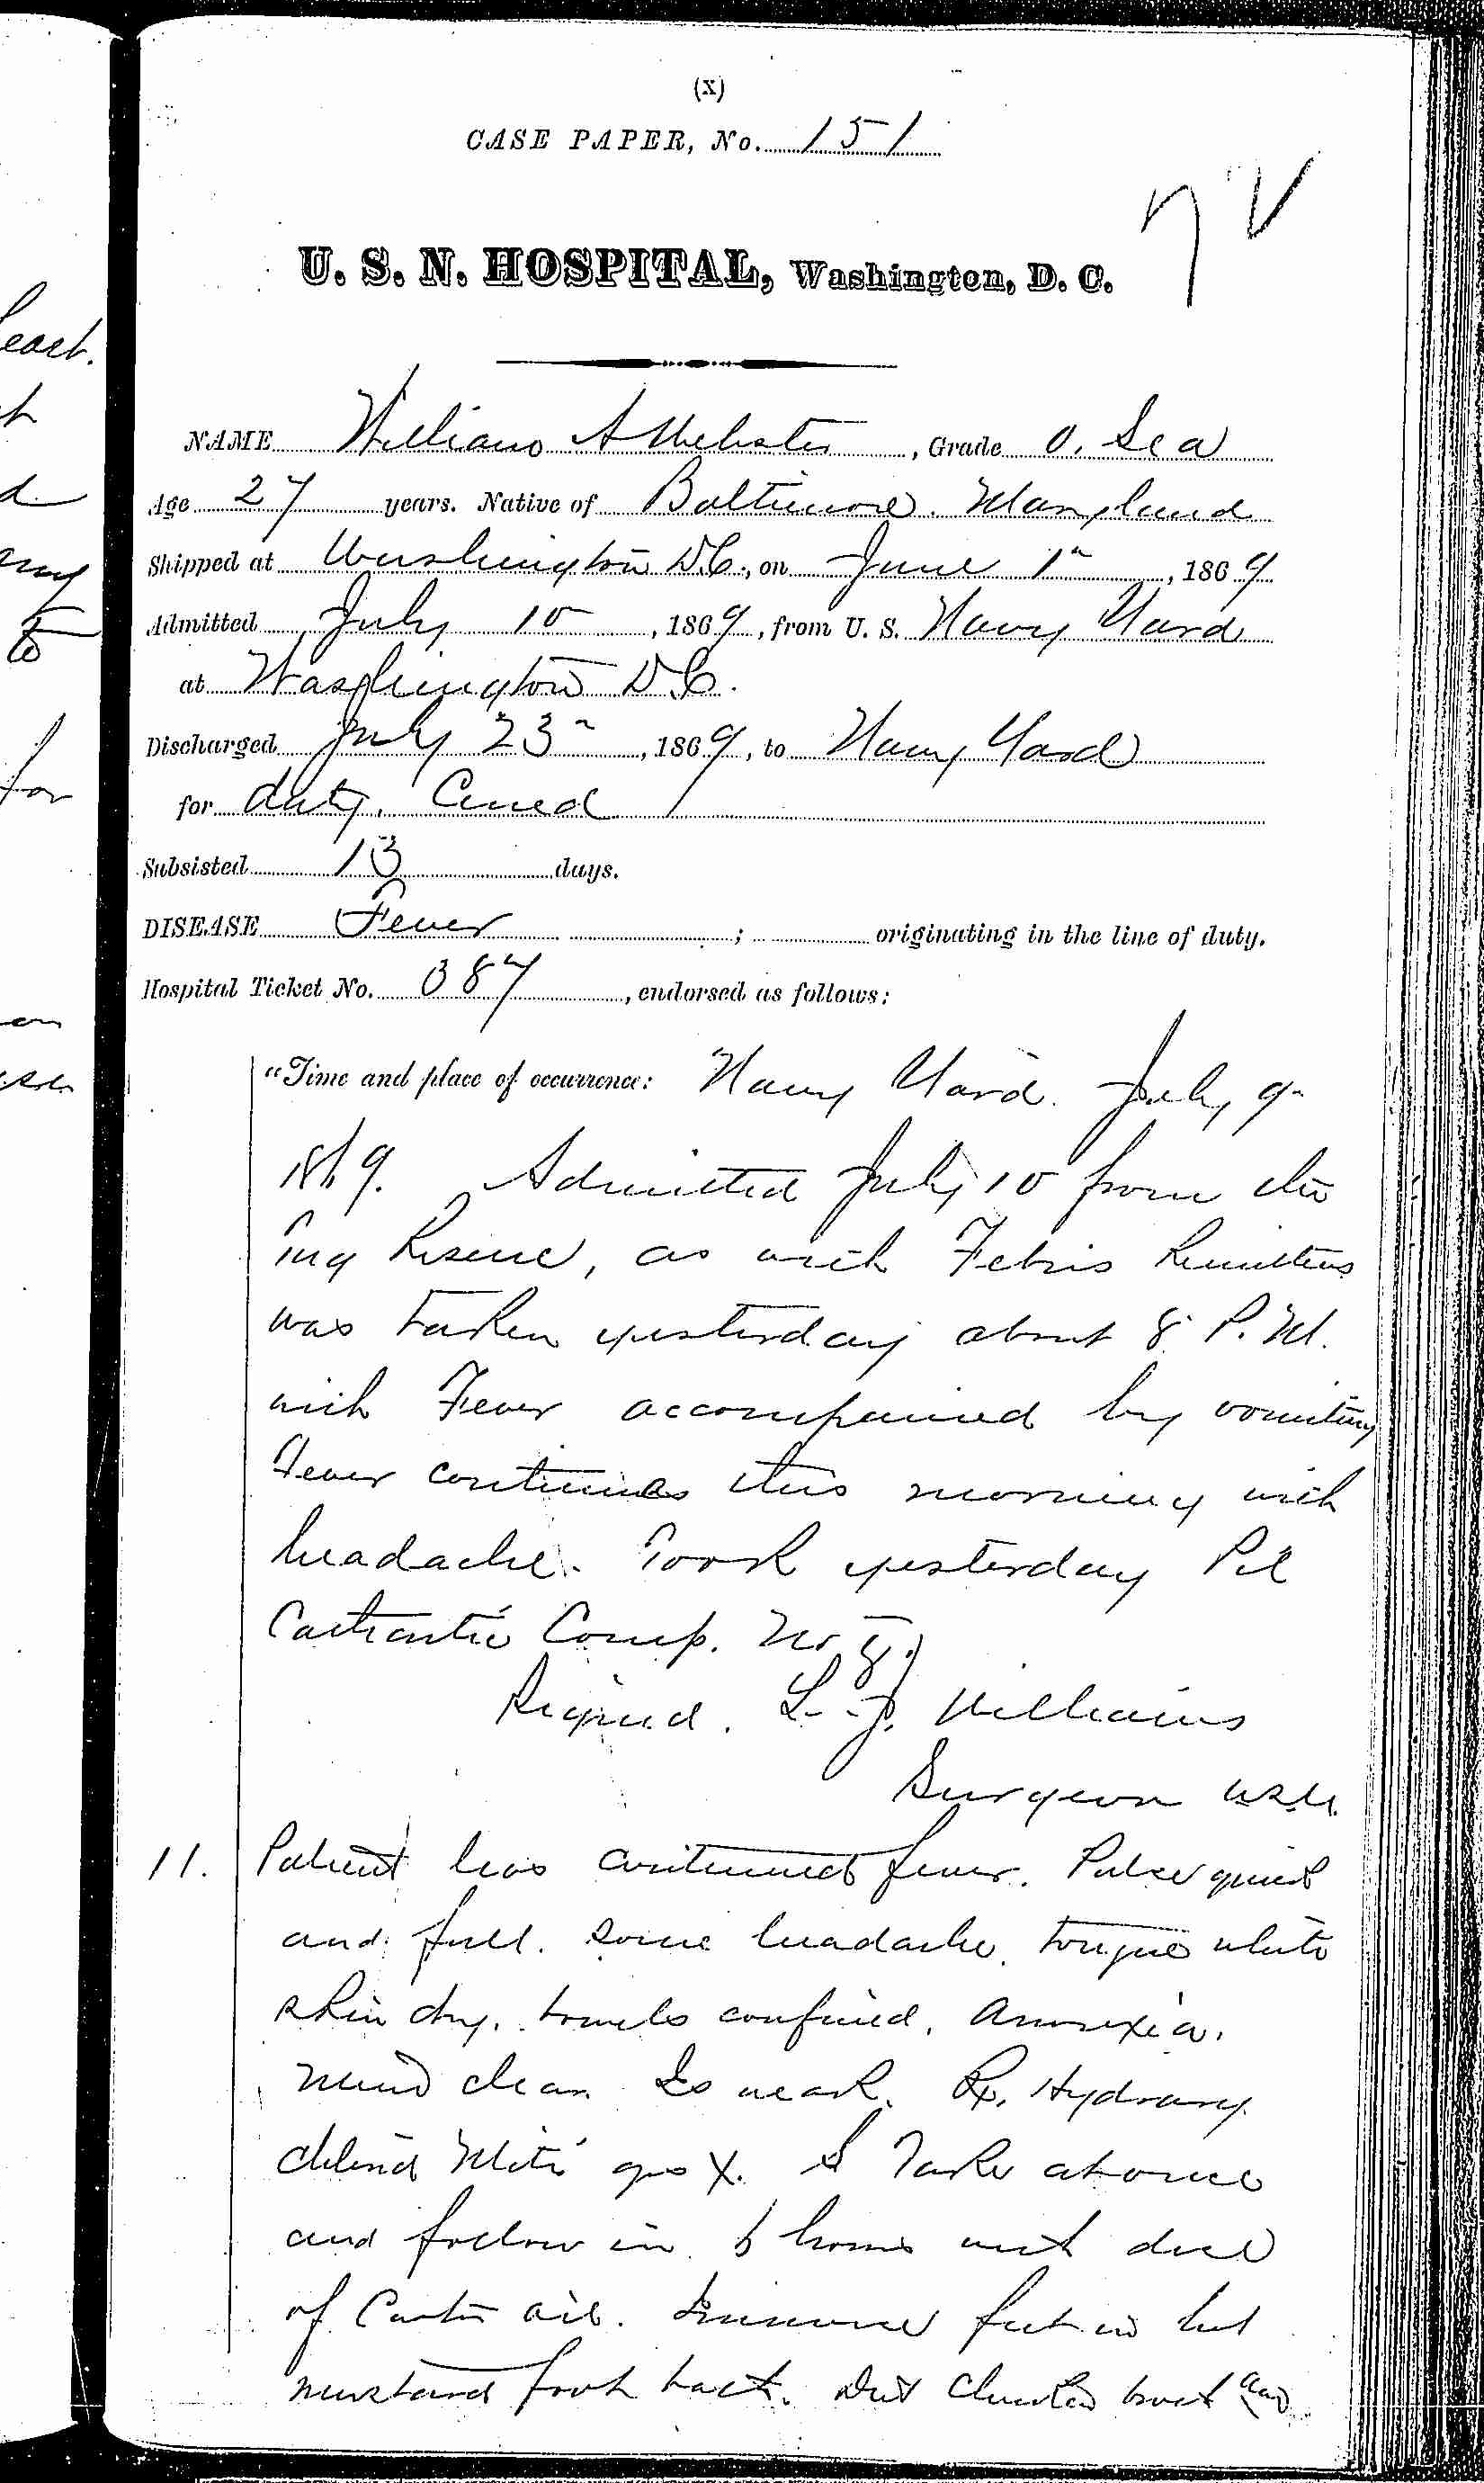 Entry for William A. Webster (page 1 of 3) in the log Hospital Tickets and Case Papers - Naval Hospital - Washington, D.C. - 1868-69